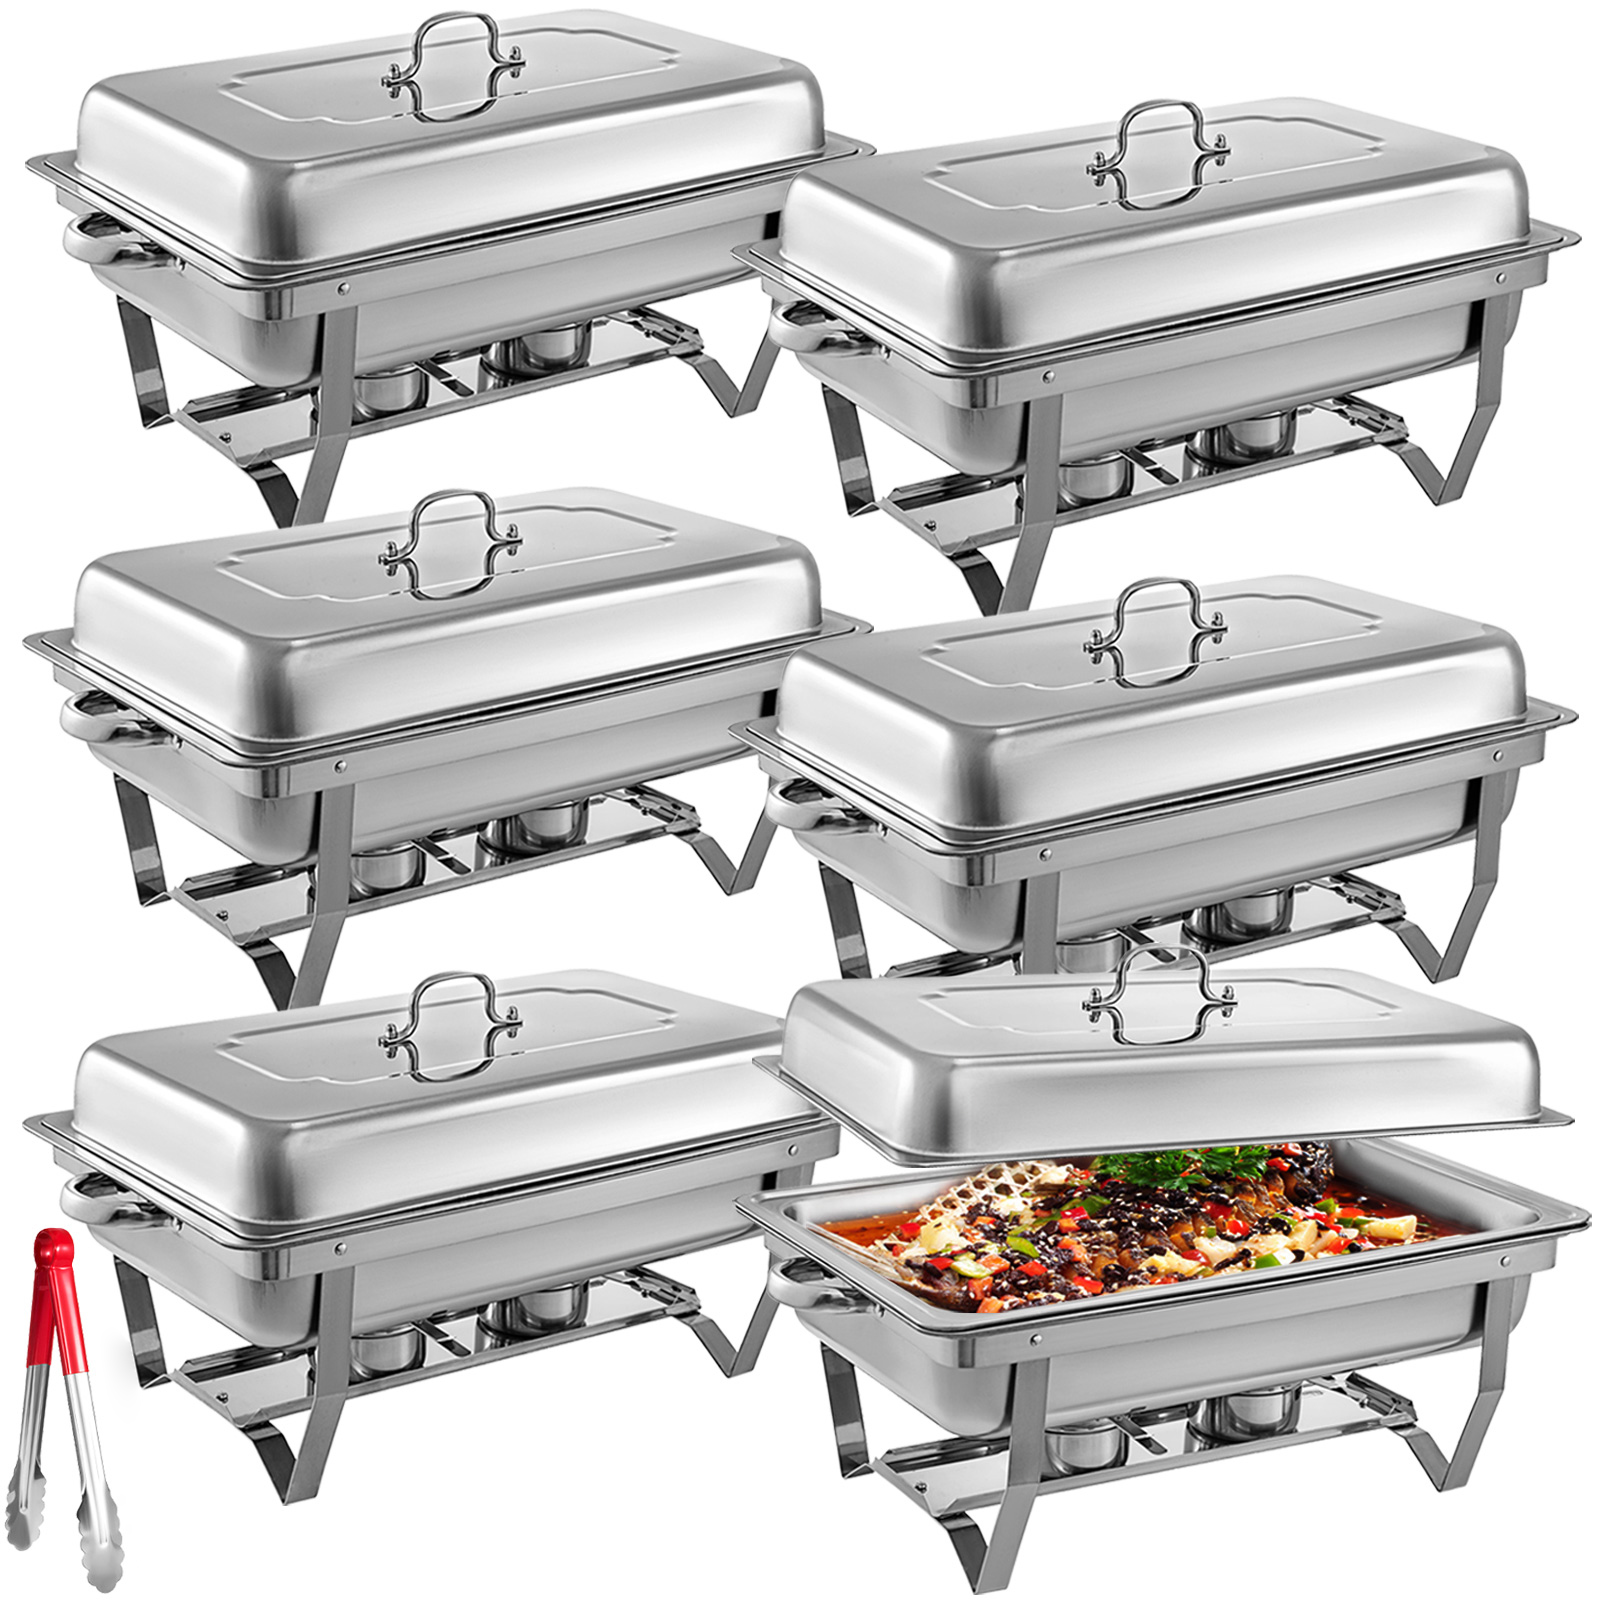 6 PACK CATERING STAINLESS STEEL CHAFER CHAFING DISH SETS 8 QT PARTY PACK 